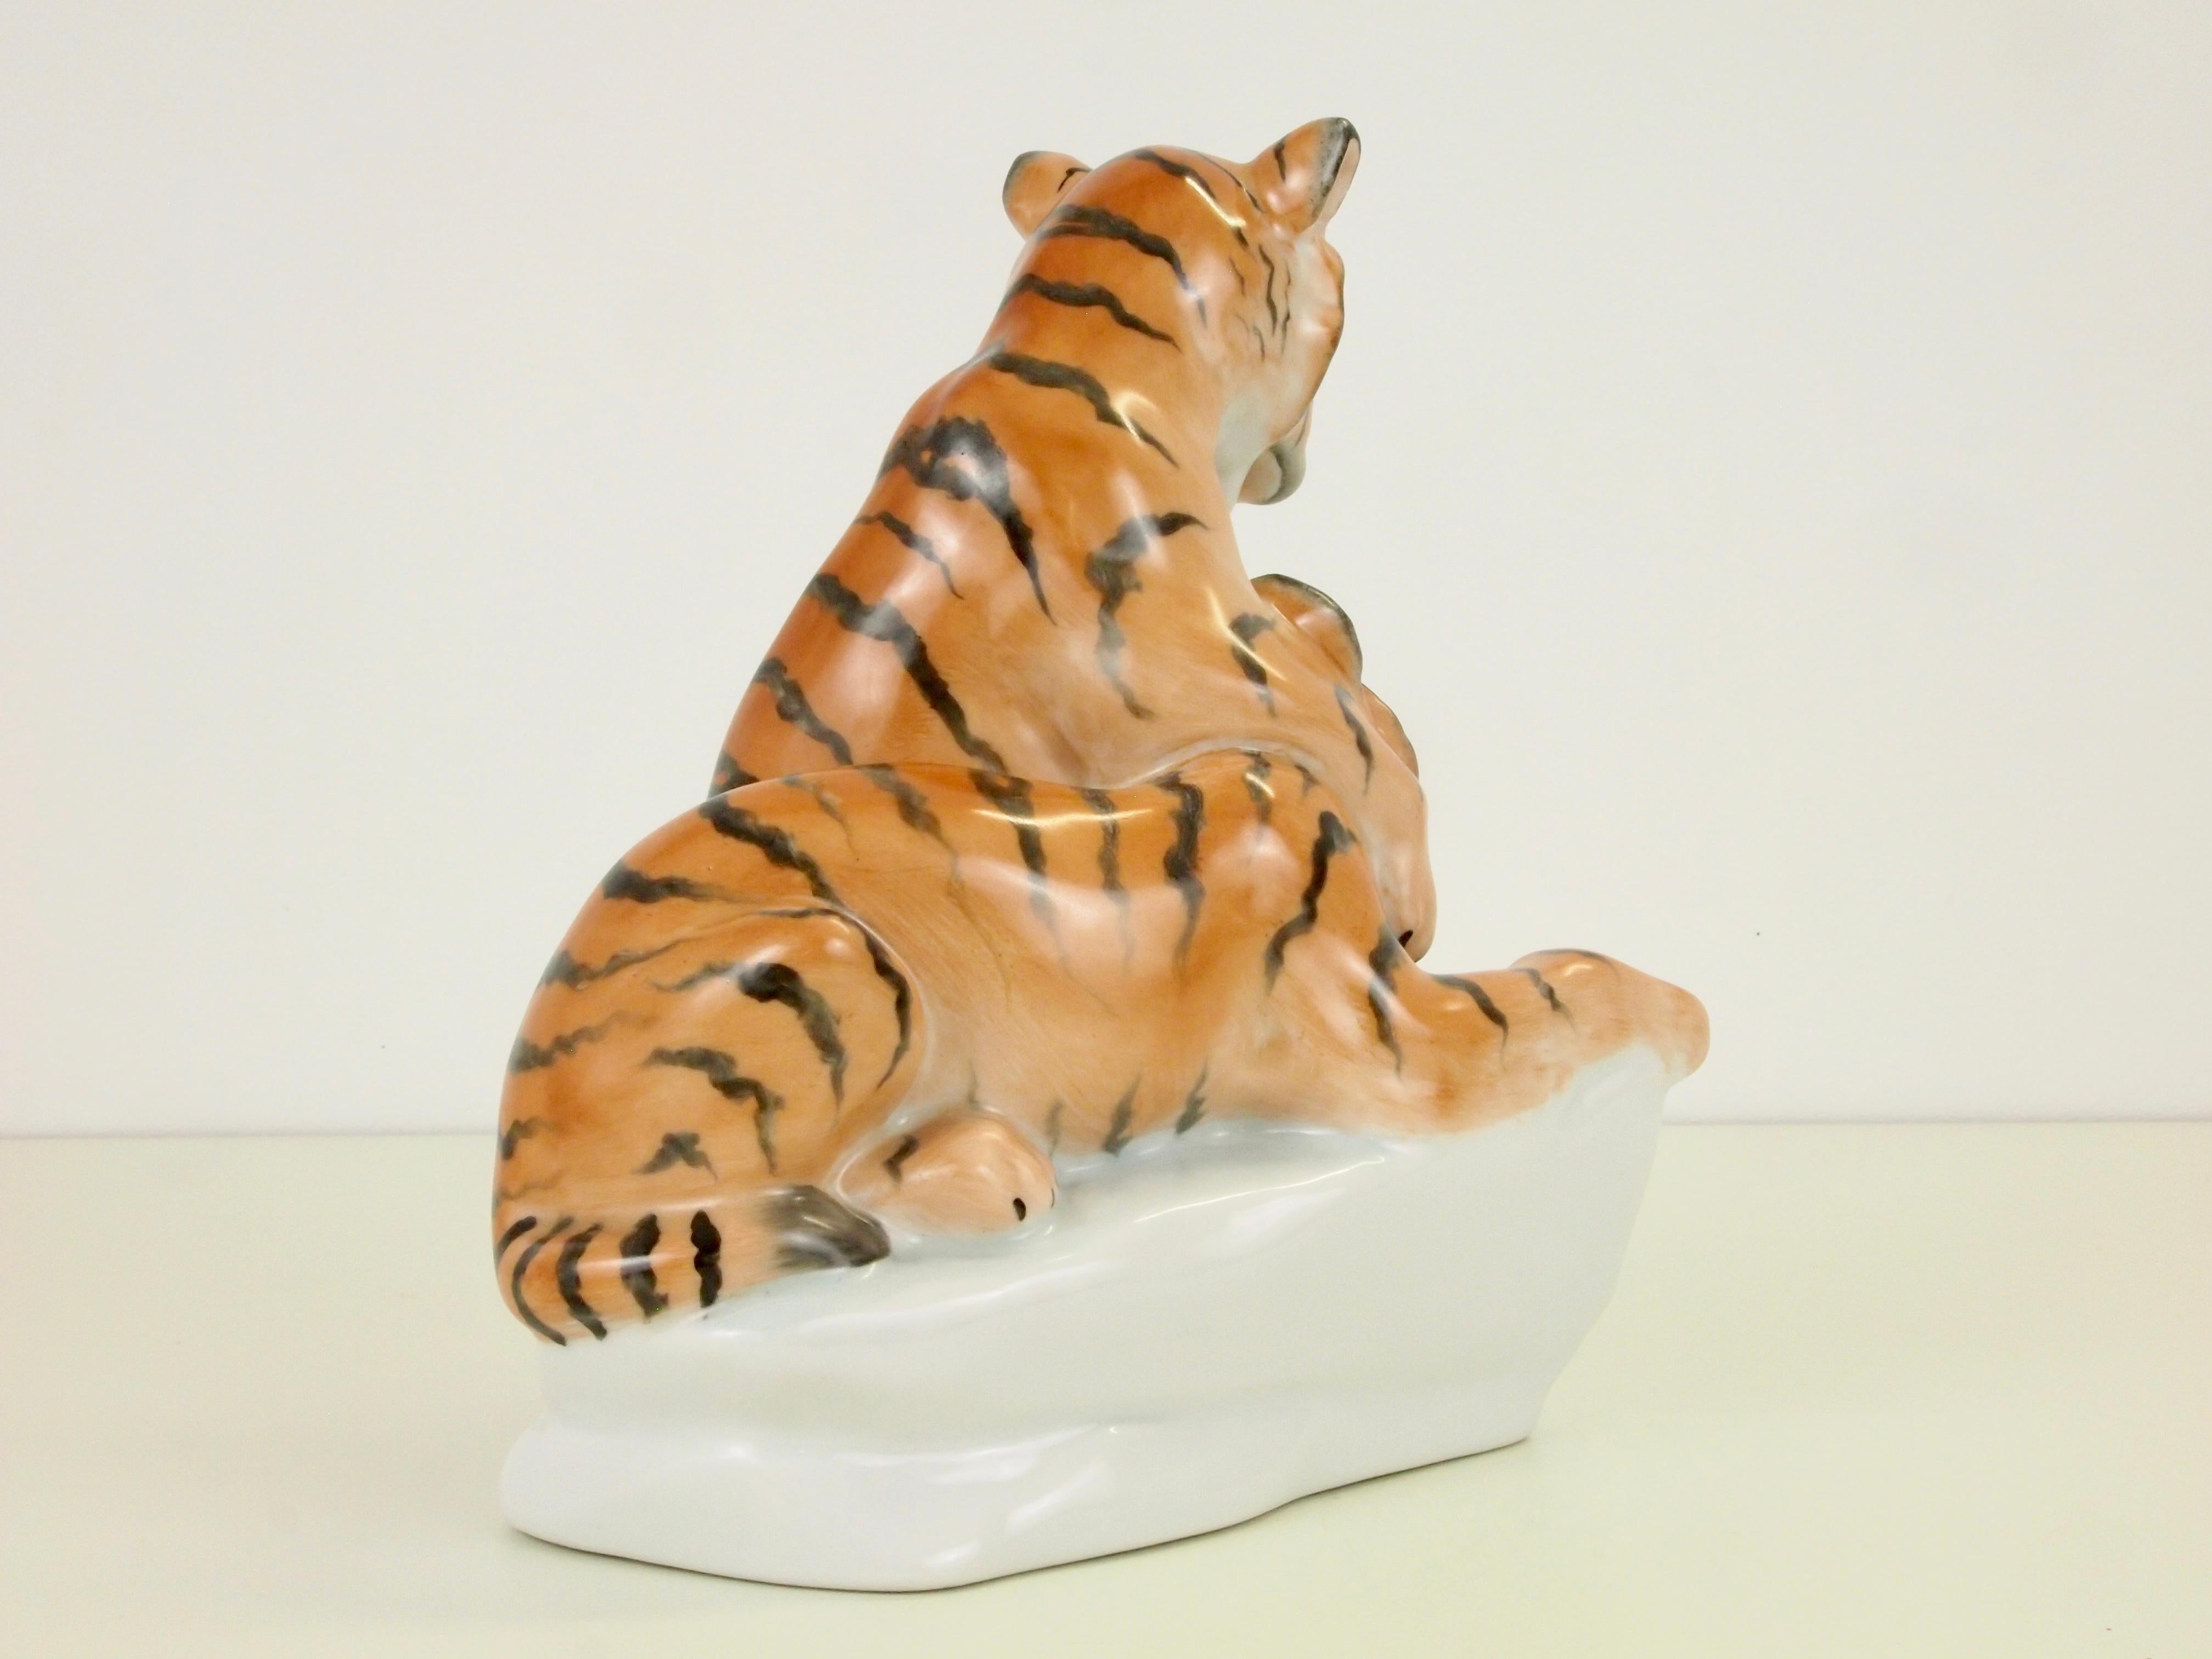 Herend Porcelain Figurine Depicting 2 Tiger Cubs In Good Condition For Sale In Hilversum, Noord Holland